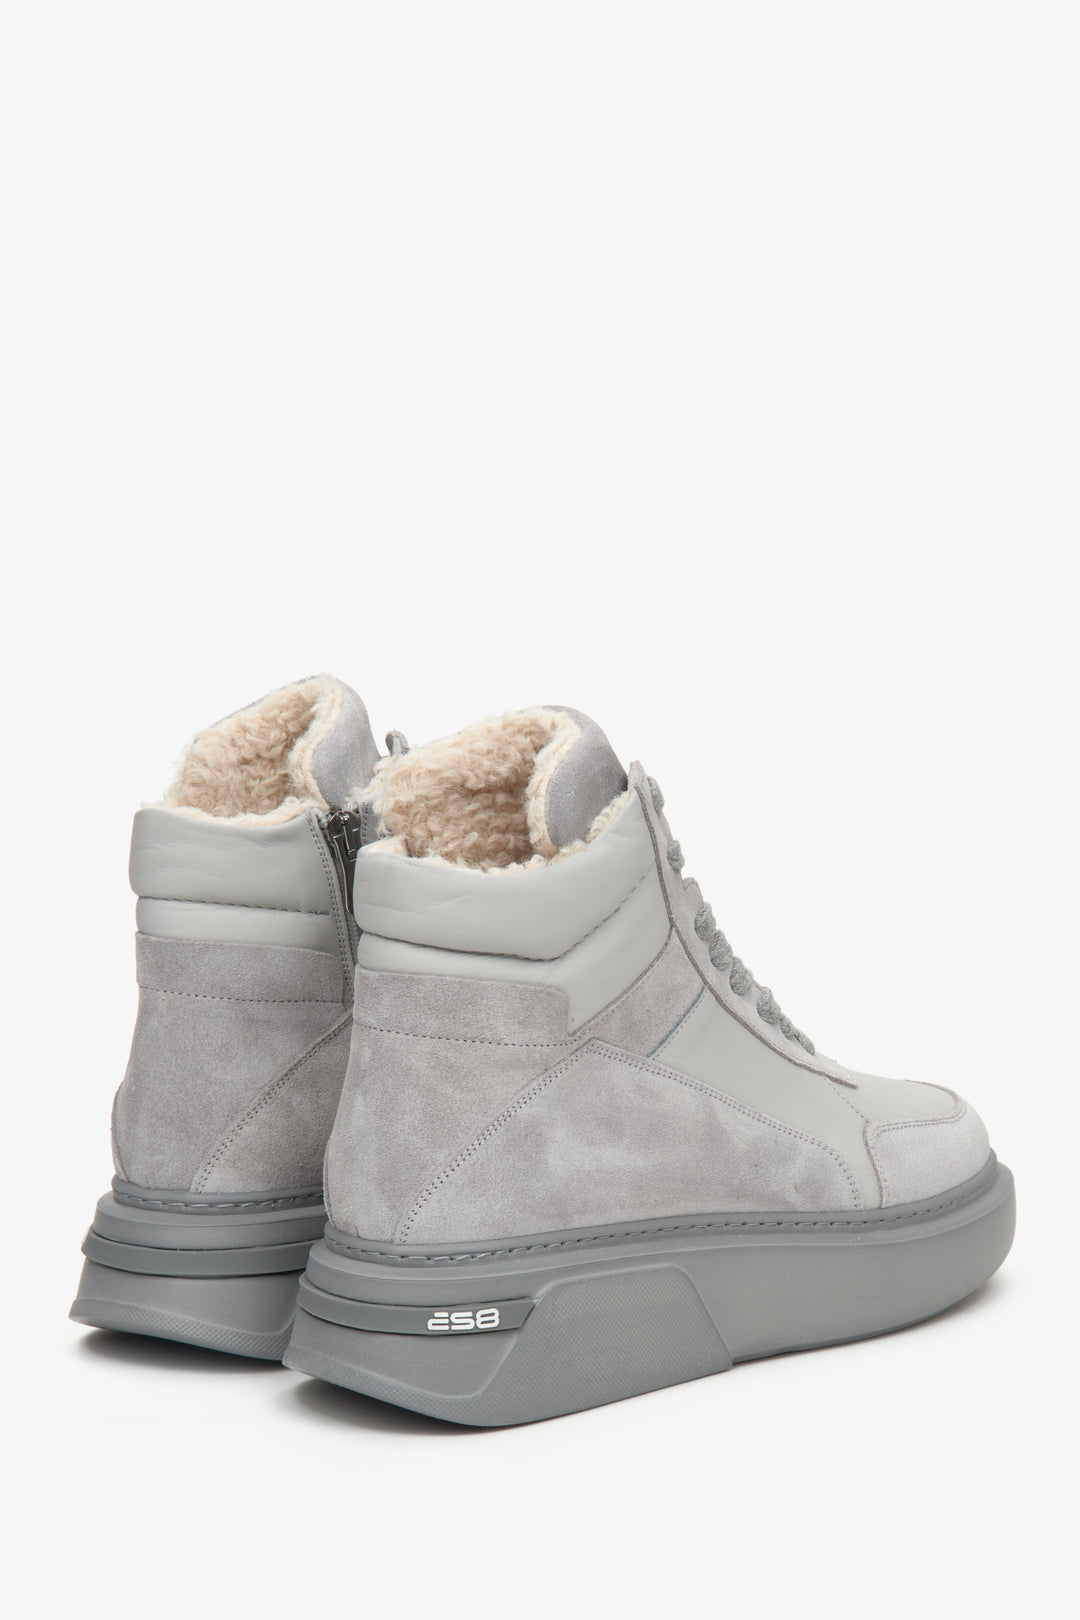 Women's grey high top sneakers by ES 8 for winter/fall.